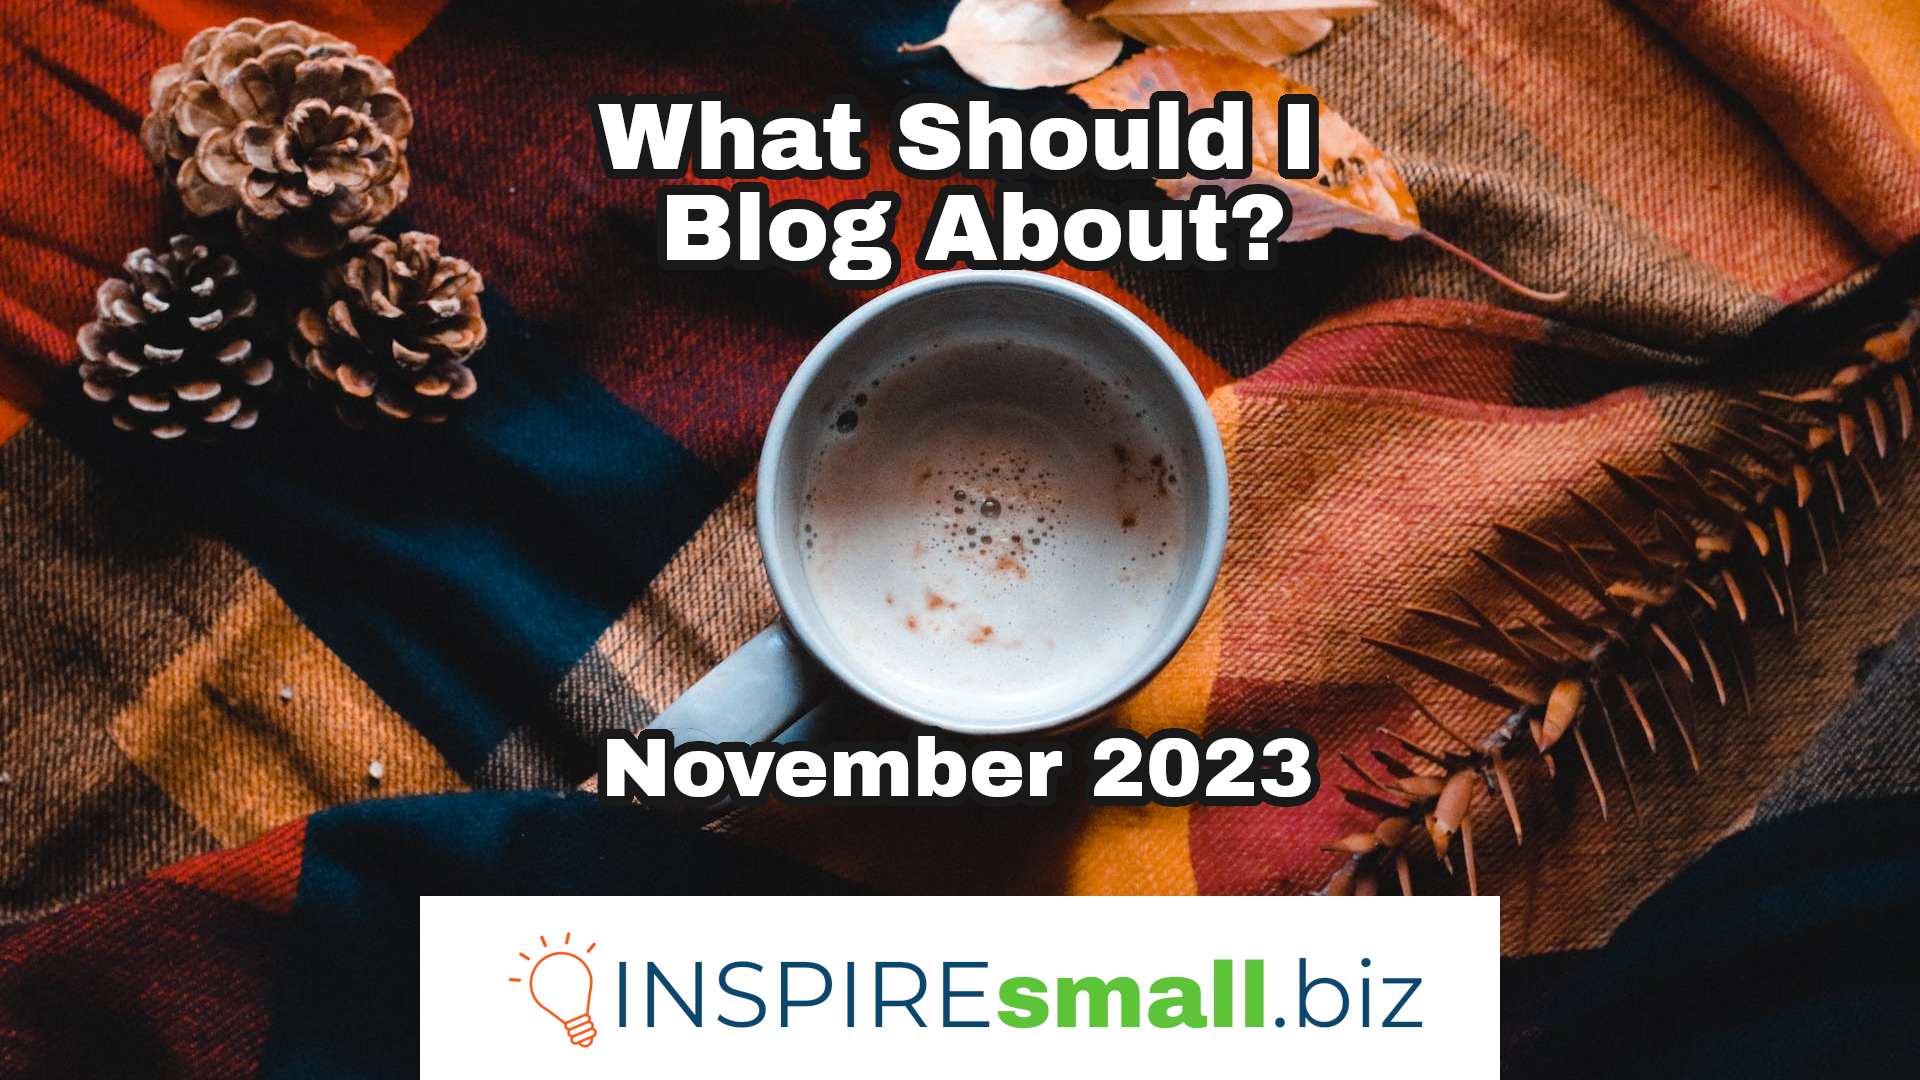 What should I blog about in November? From INSPIREsmall.biz